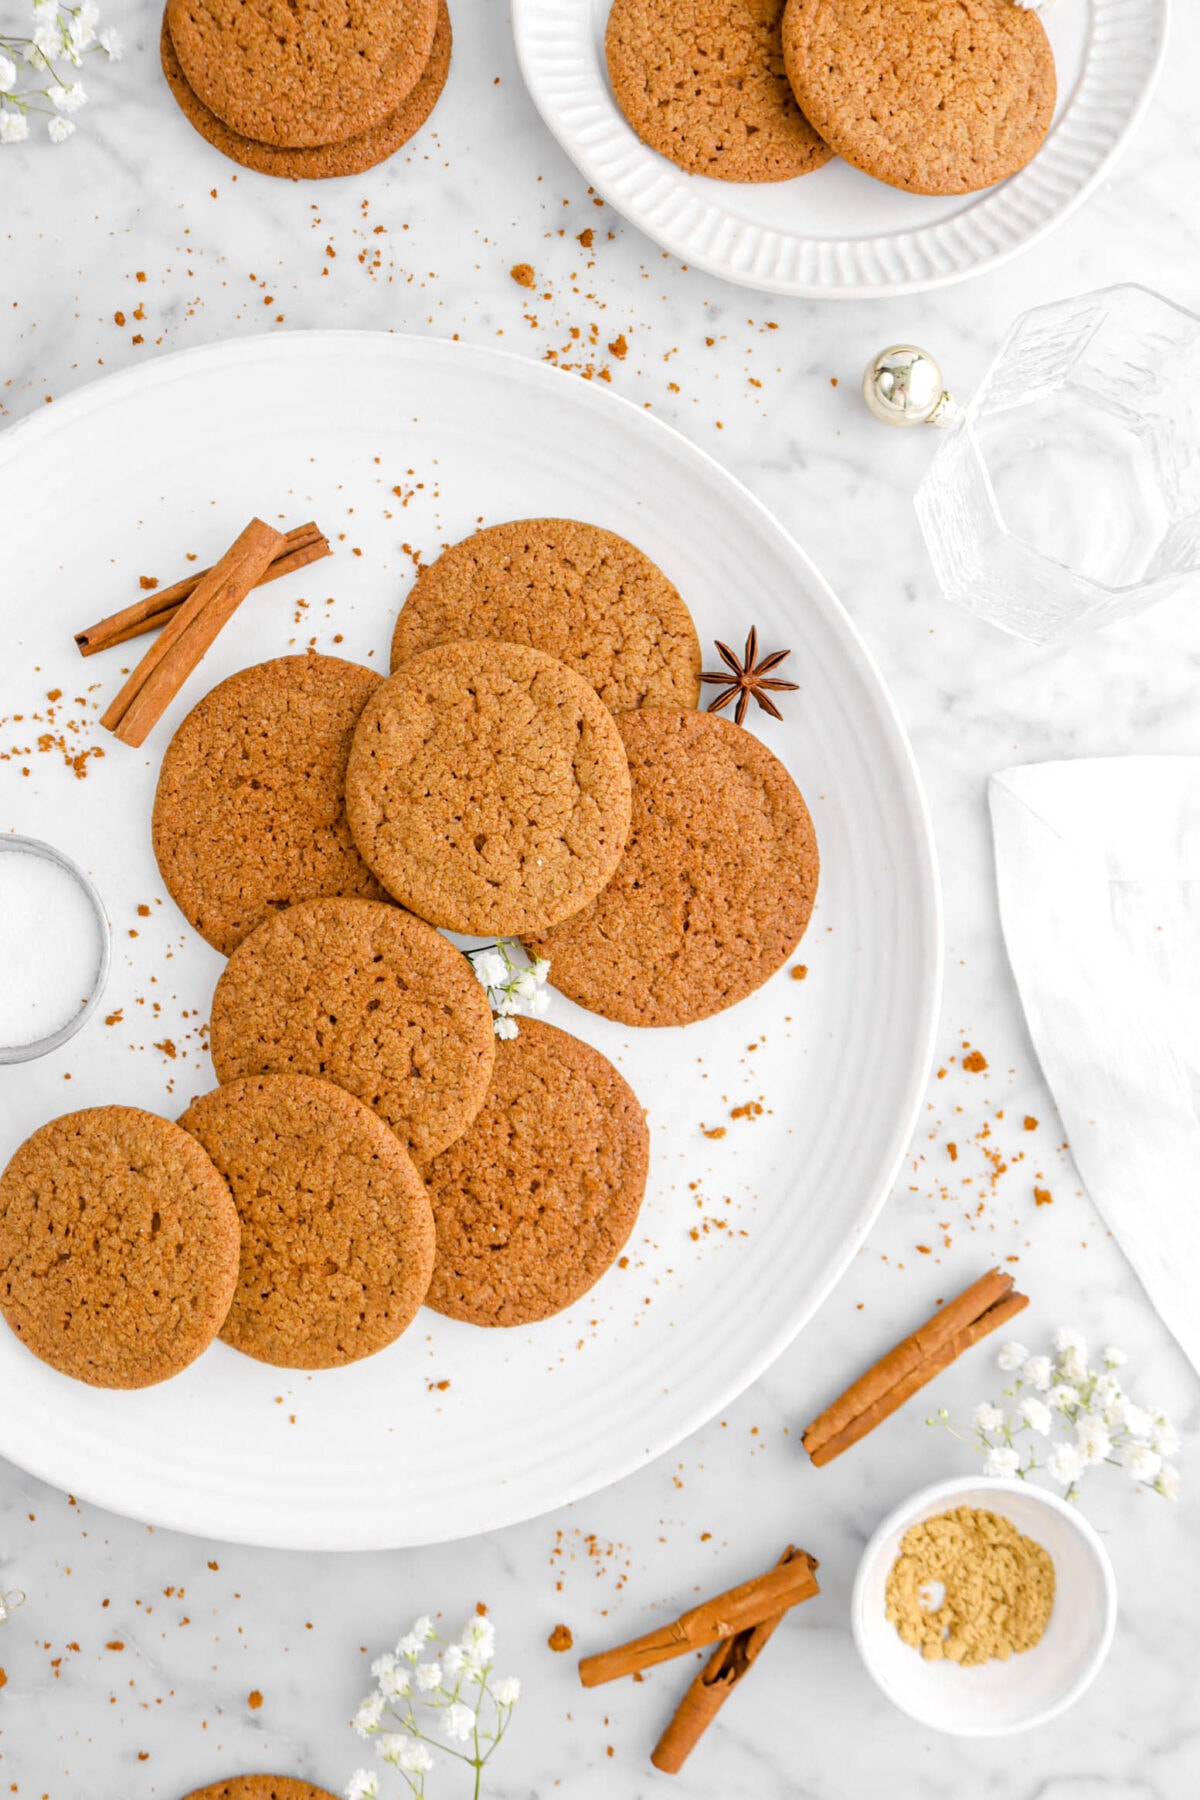 cropped overhead of cookies on plate with star anise pot and cinnamon sticks, white flowers, and more cookies around.